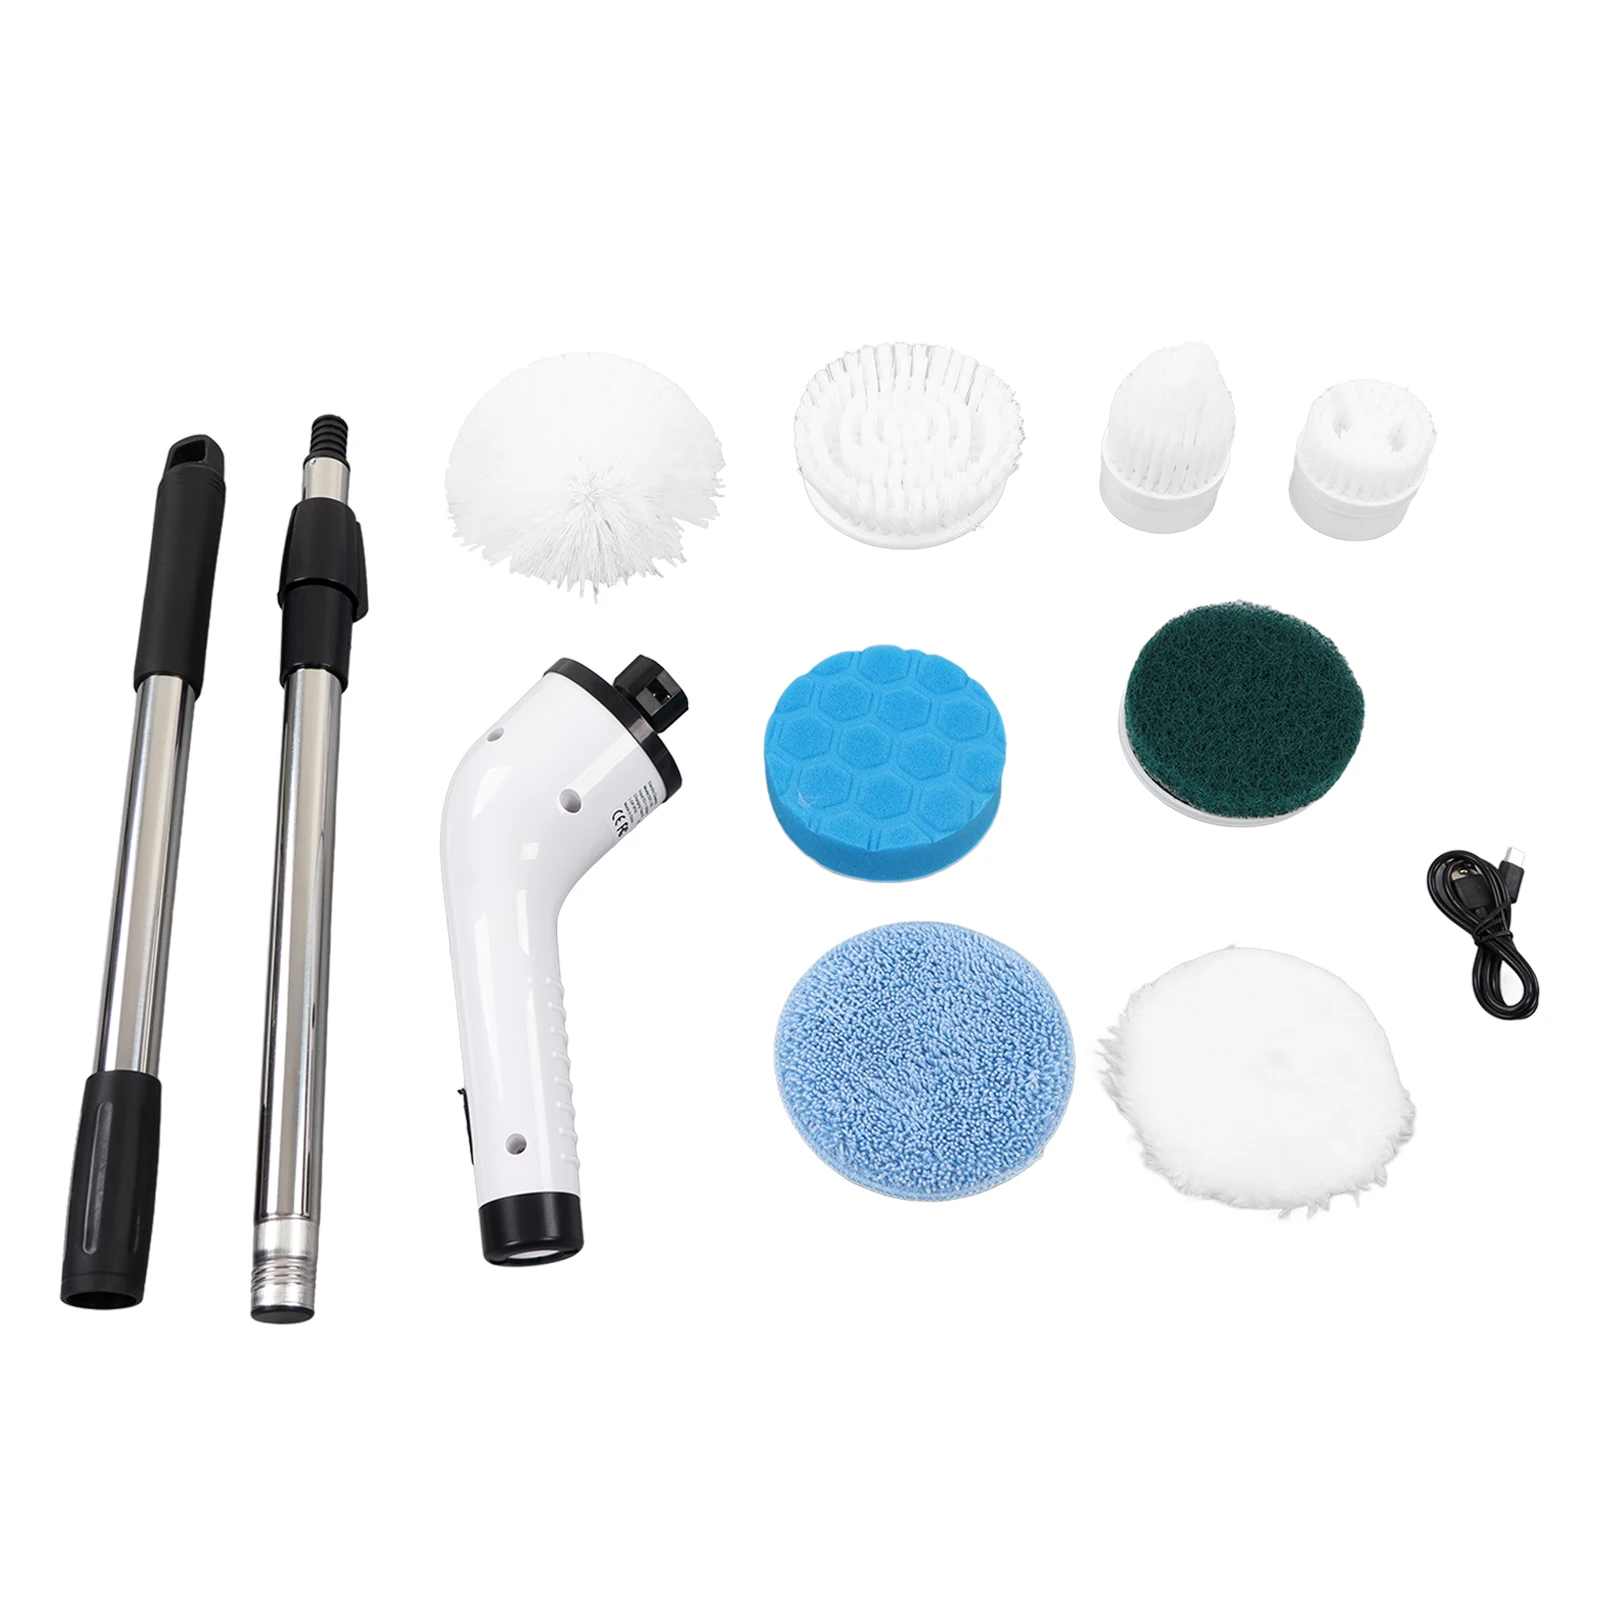 https://ae01.alicdn.com/kf/S0b1ecf052fce48b0b21c6b39491eab3dl/Electric-Cleaning-Brush-Spin-Scrubber-Brushing-Head-for-Bathroom.jpg